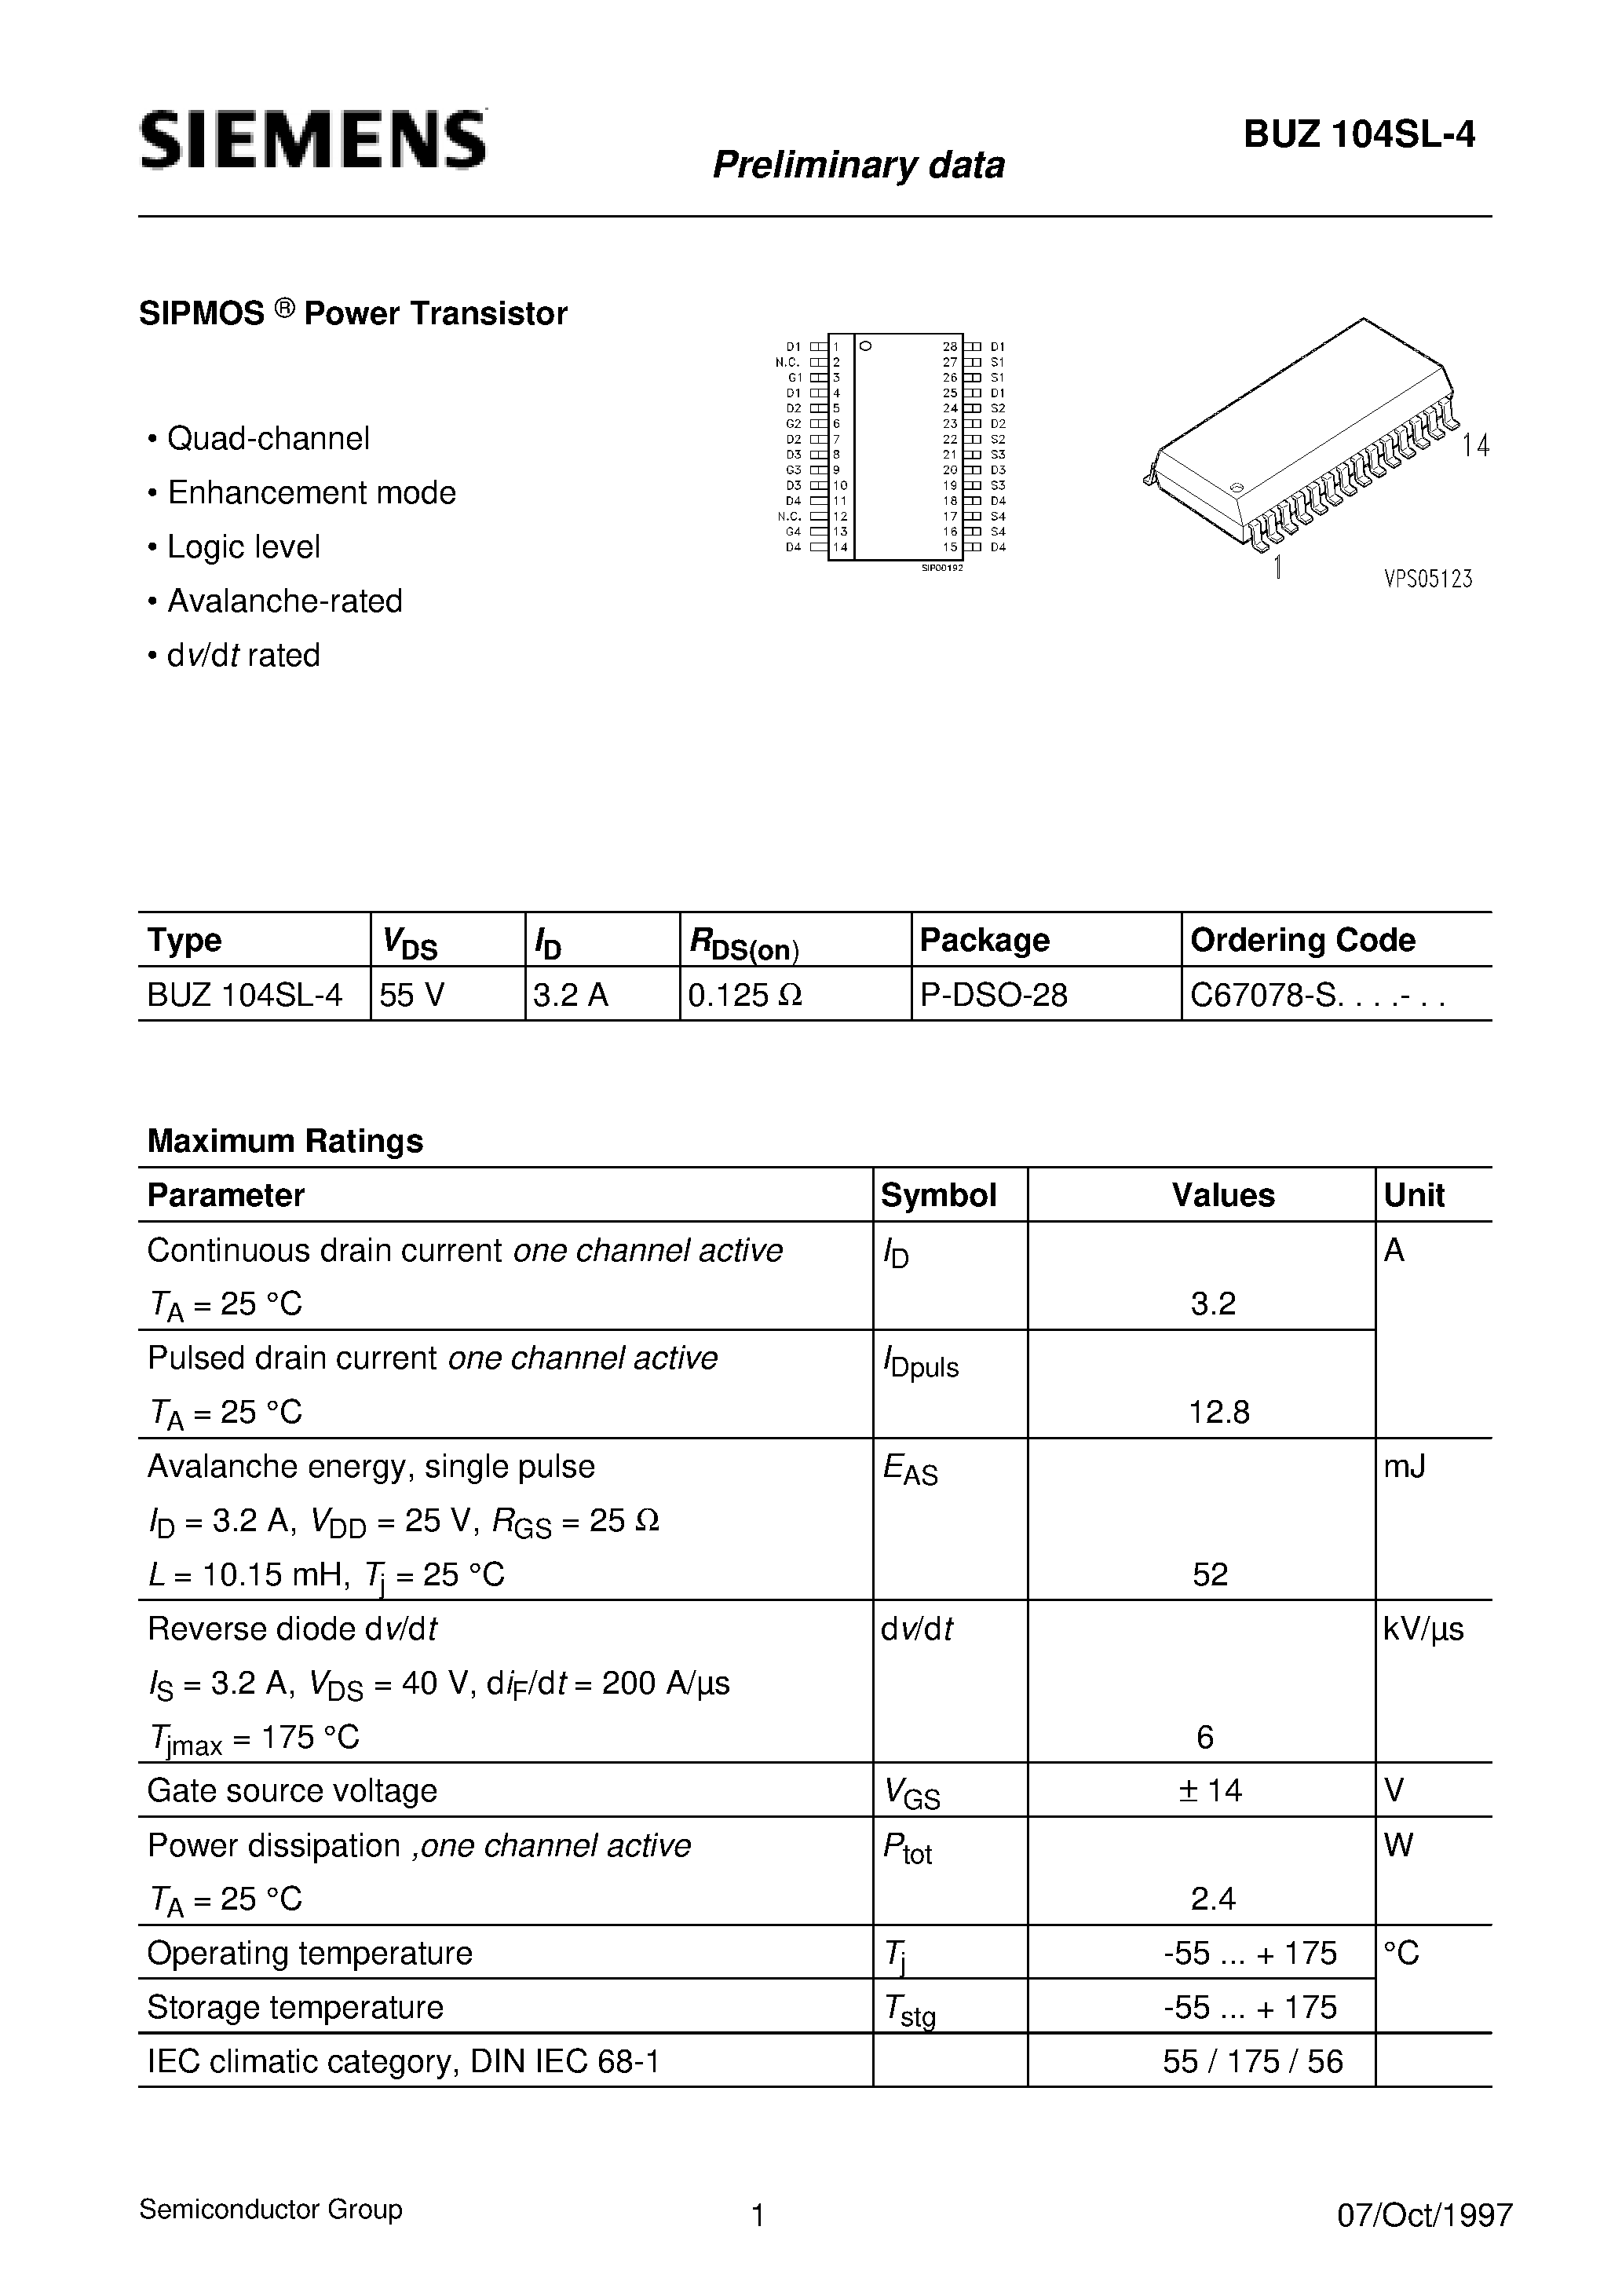 Datasheet BUZ104SL-4 - SIPMOS Power Transistor (Quad-channel Enhancement mode Logic level Avalanche-rated d v/d t rated) page 1